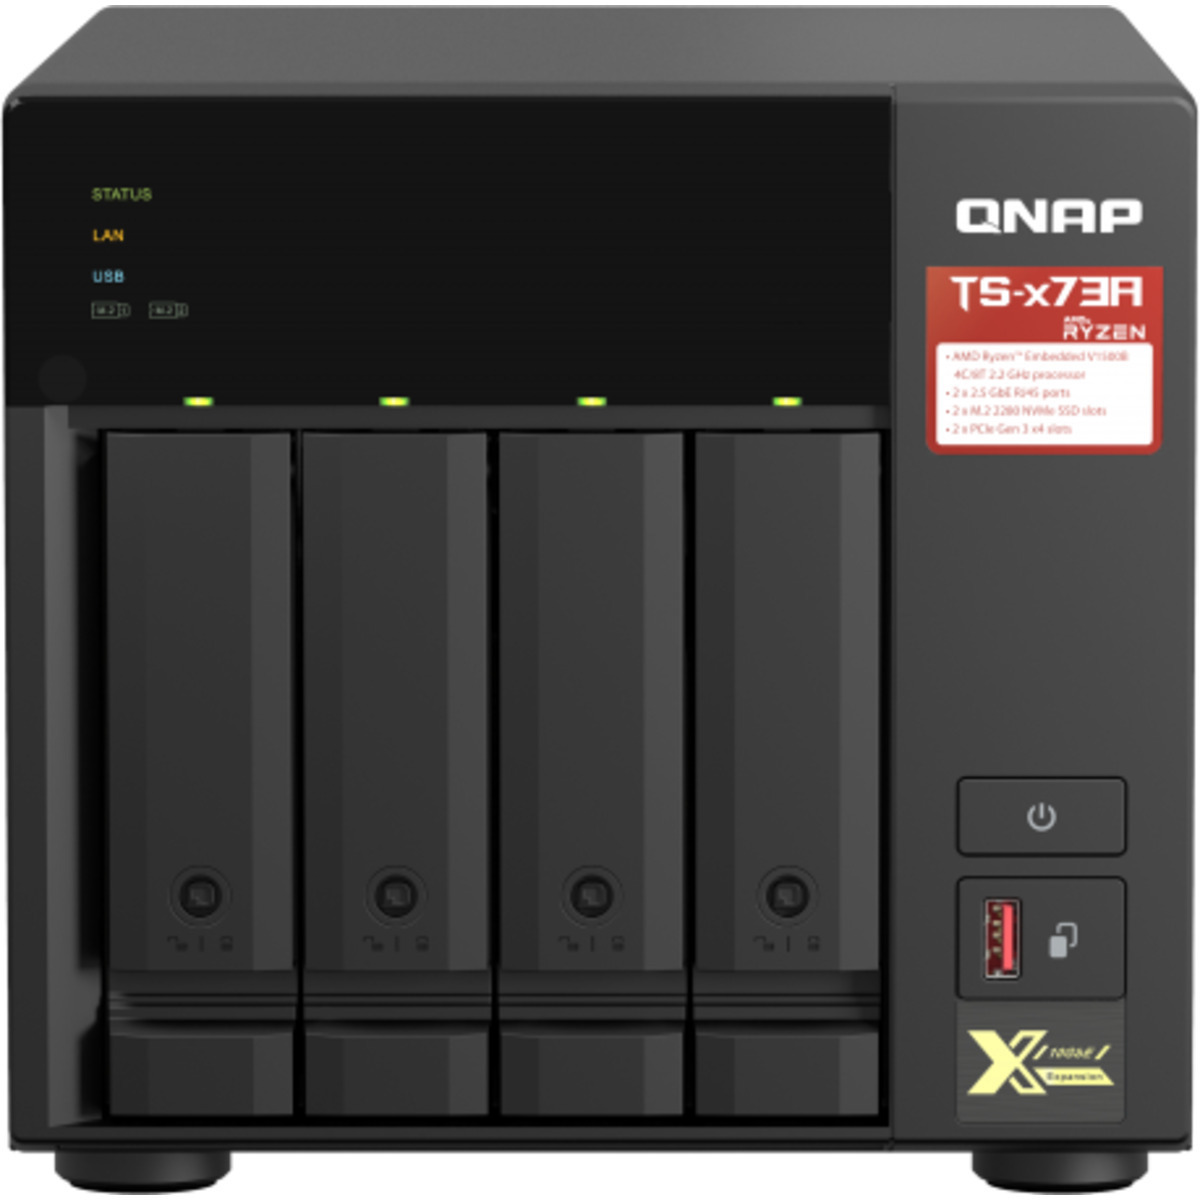 buy $1100 QNAP TS-473A 16tb Desktop NAS - Network Attached Storage Device 4x4000gb Toshiba MN Series MN08ADA400E 3.5 7200rpm SATA 6Gb/s HDD NAS Class Drives Installed - Burn-In Tested - ON SALE - nas headquarters buy network attached storage server device das new raid-5 free shipping simply usa TS-473A